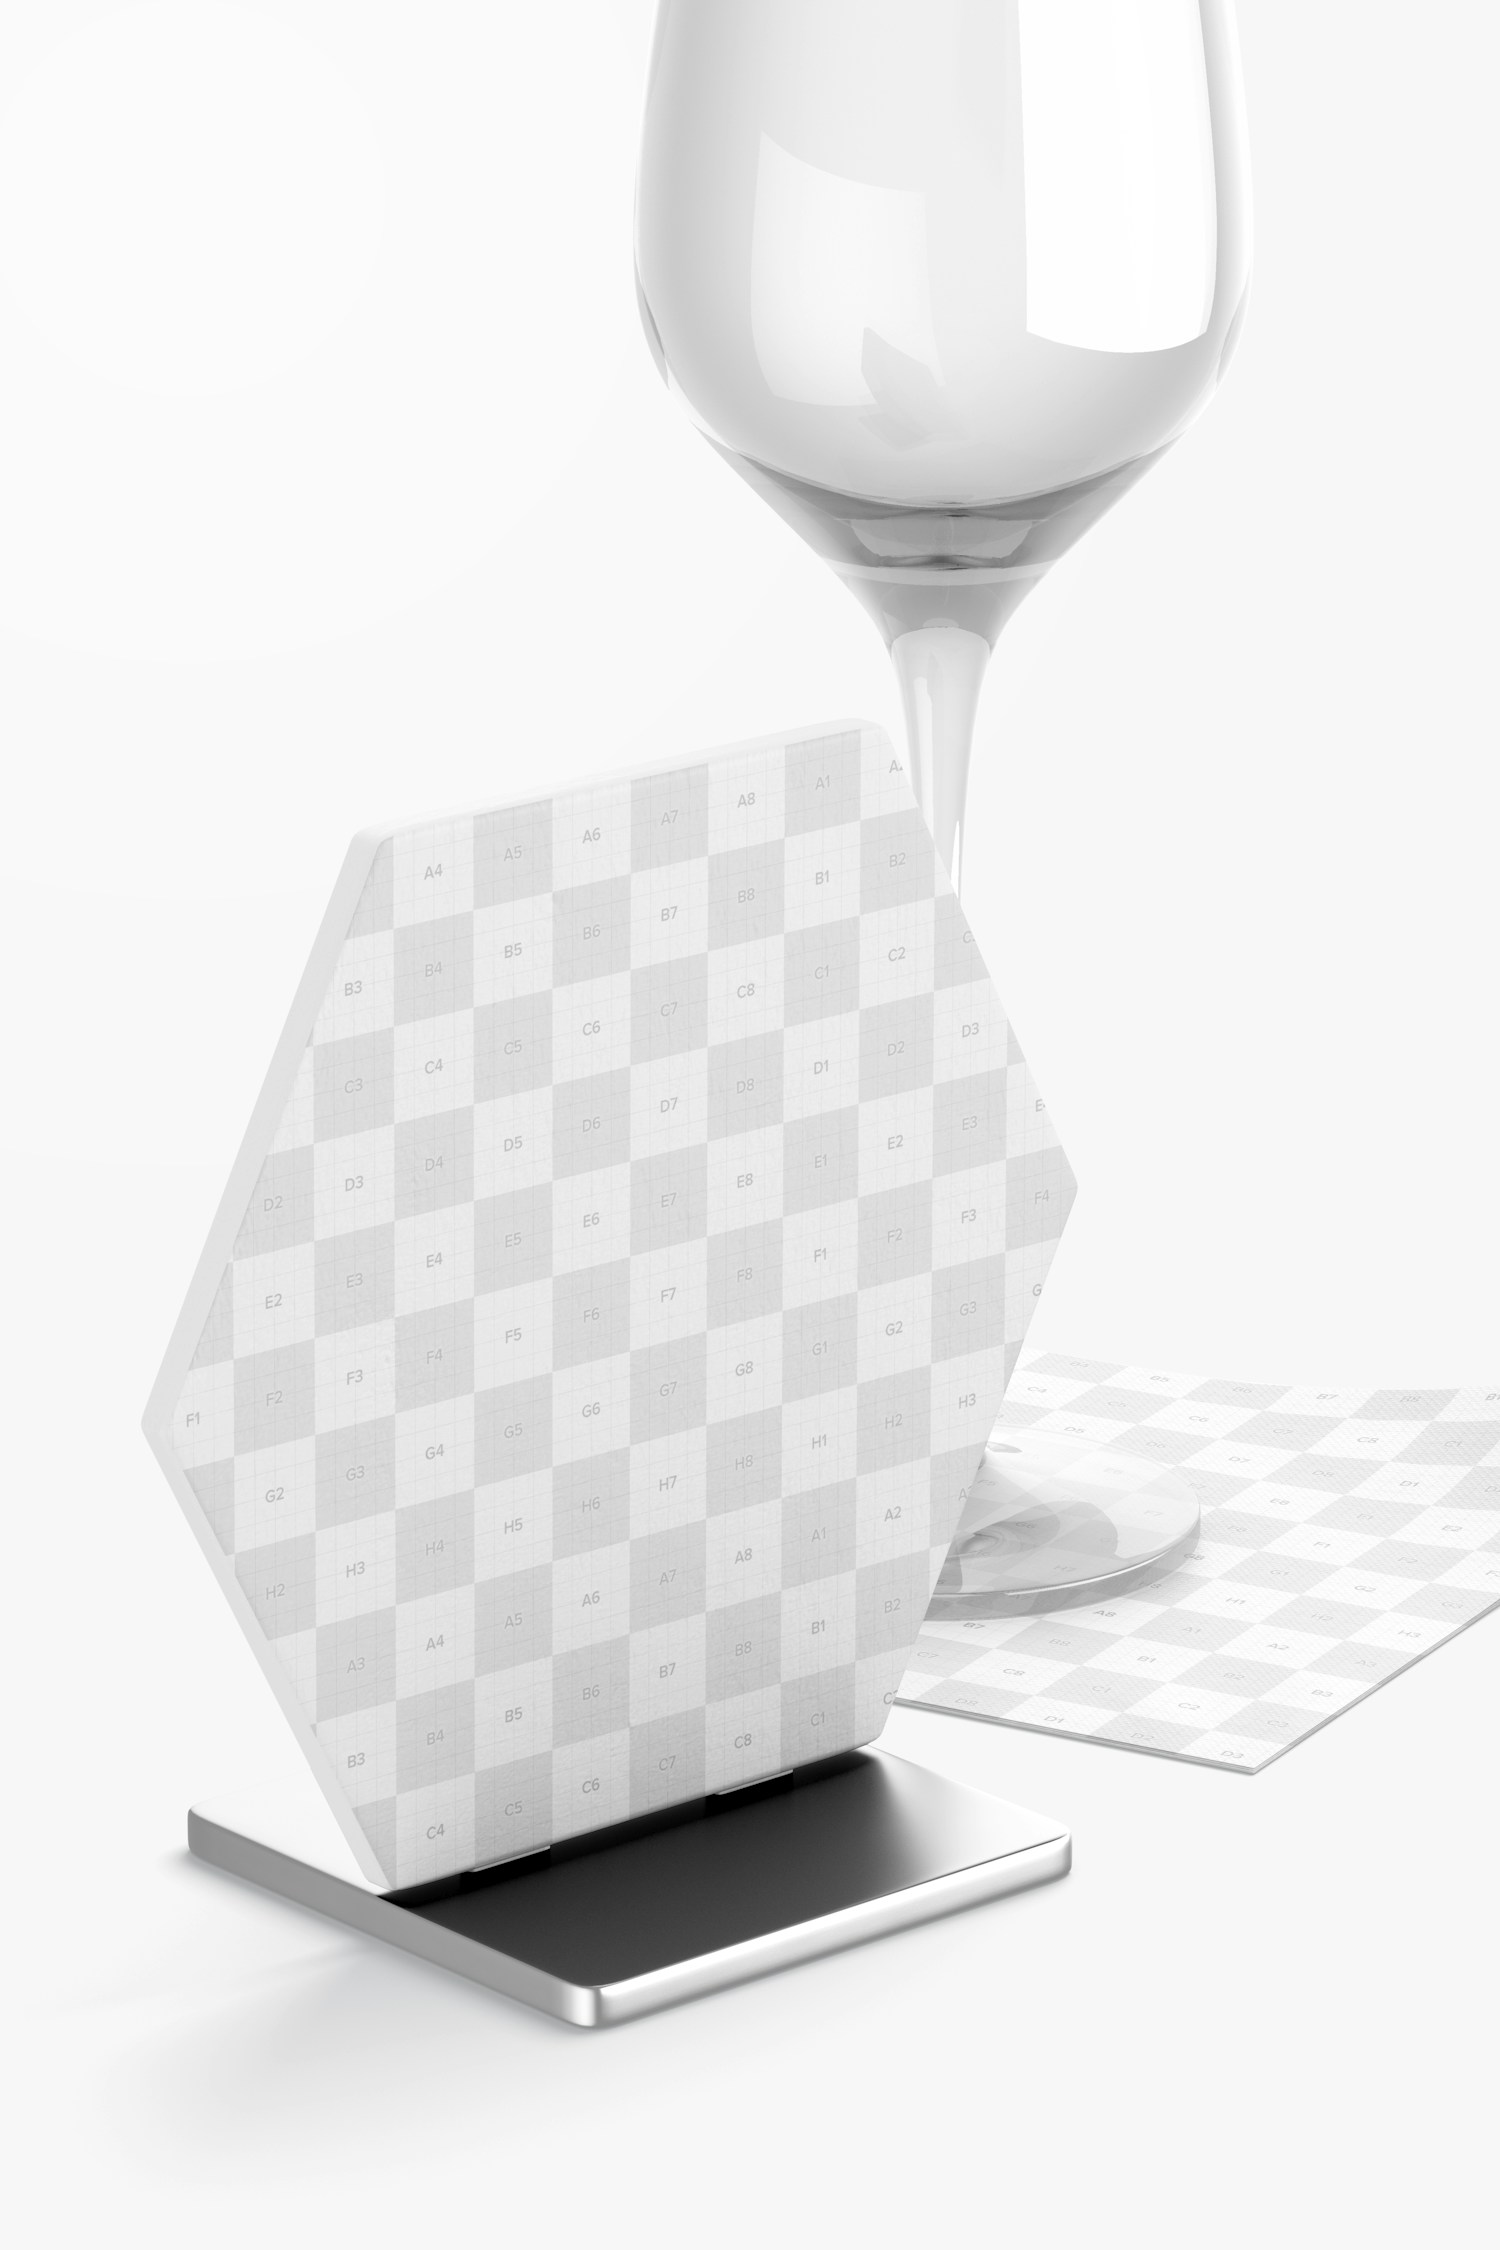 Hexagon Table Card Holder with Cup Mockup